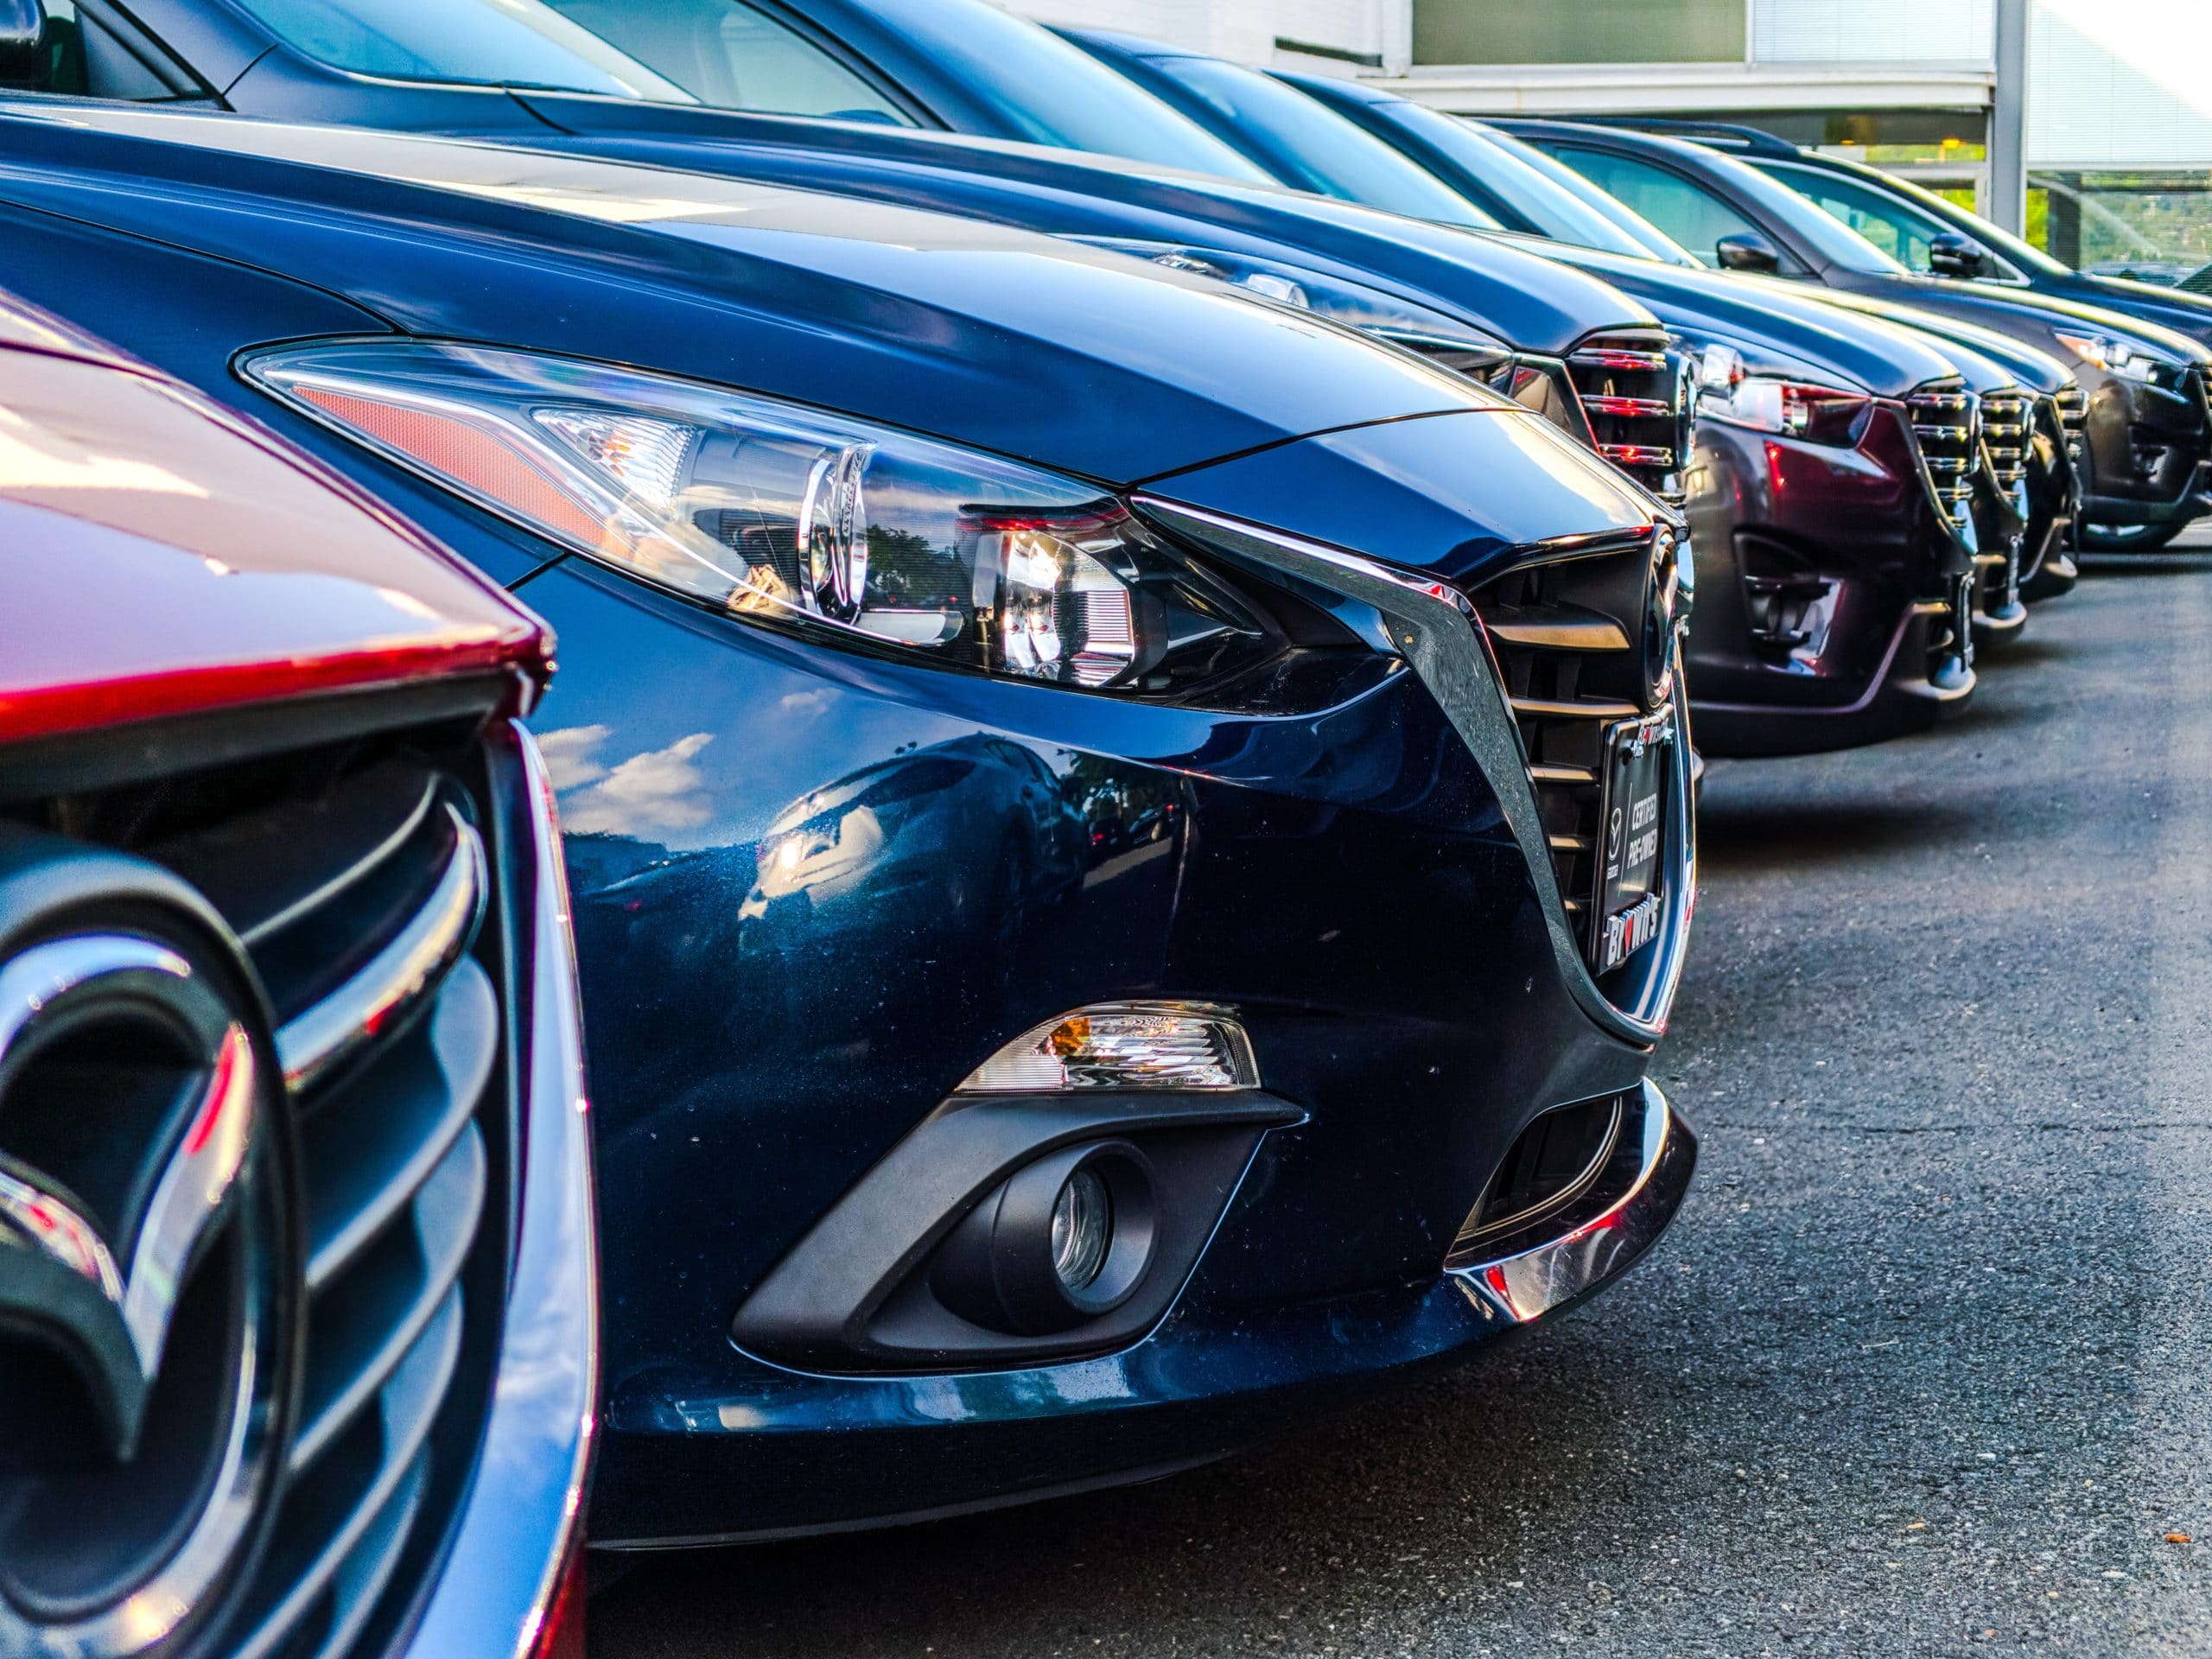 An image of a bunch of automobiles at a car dealership